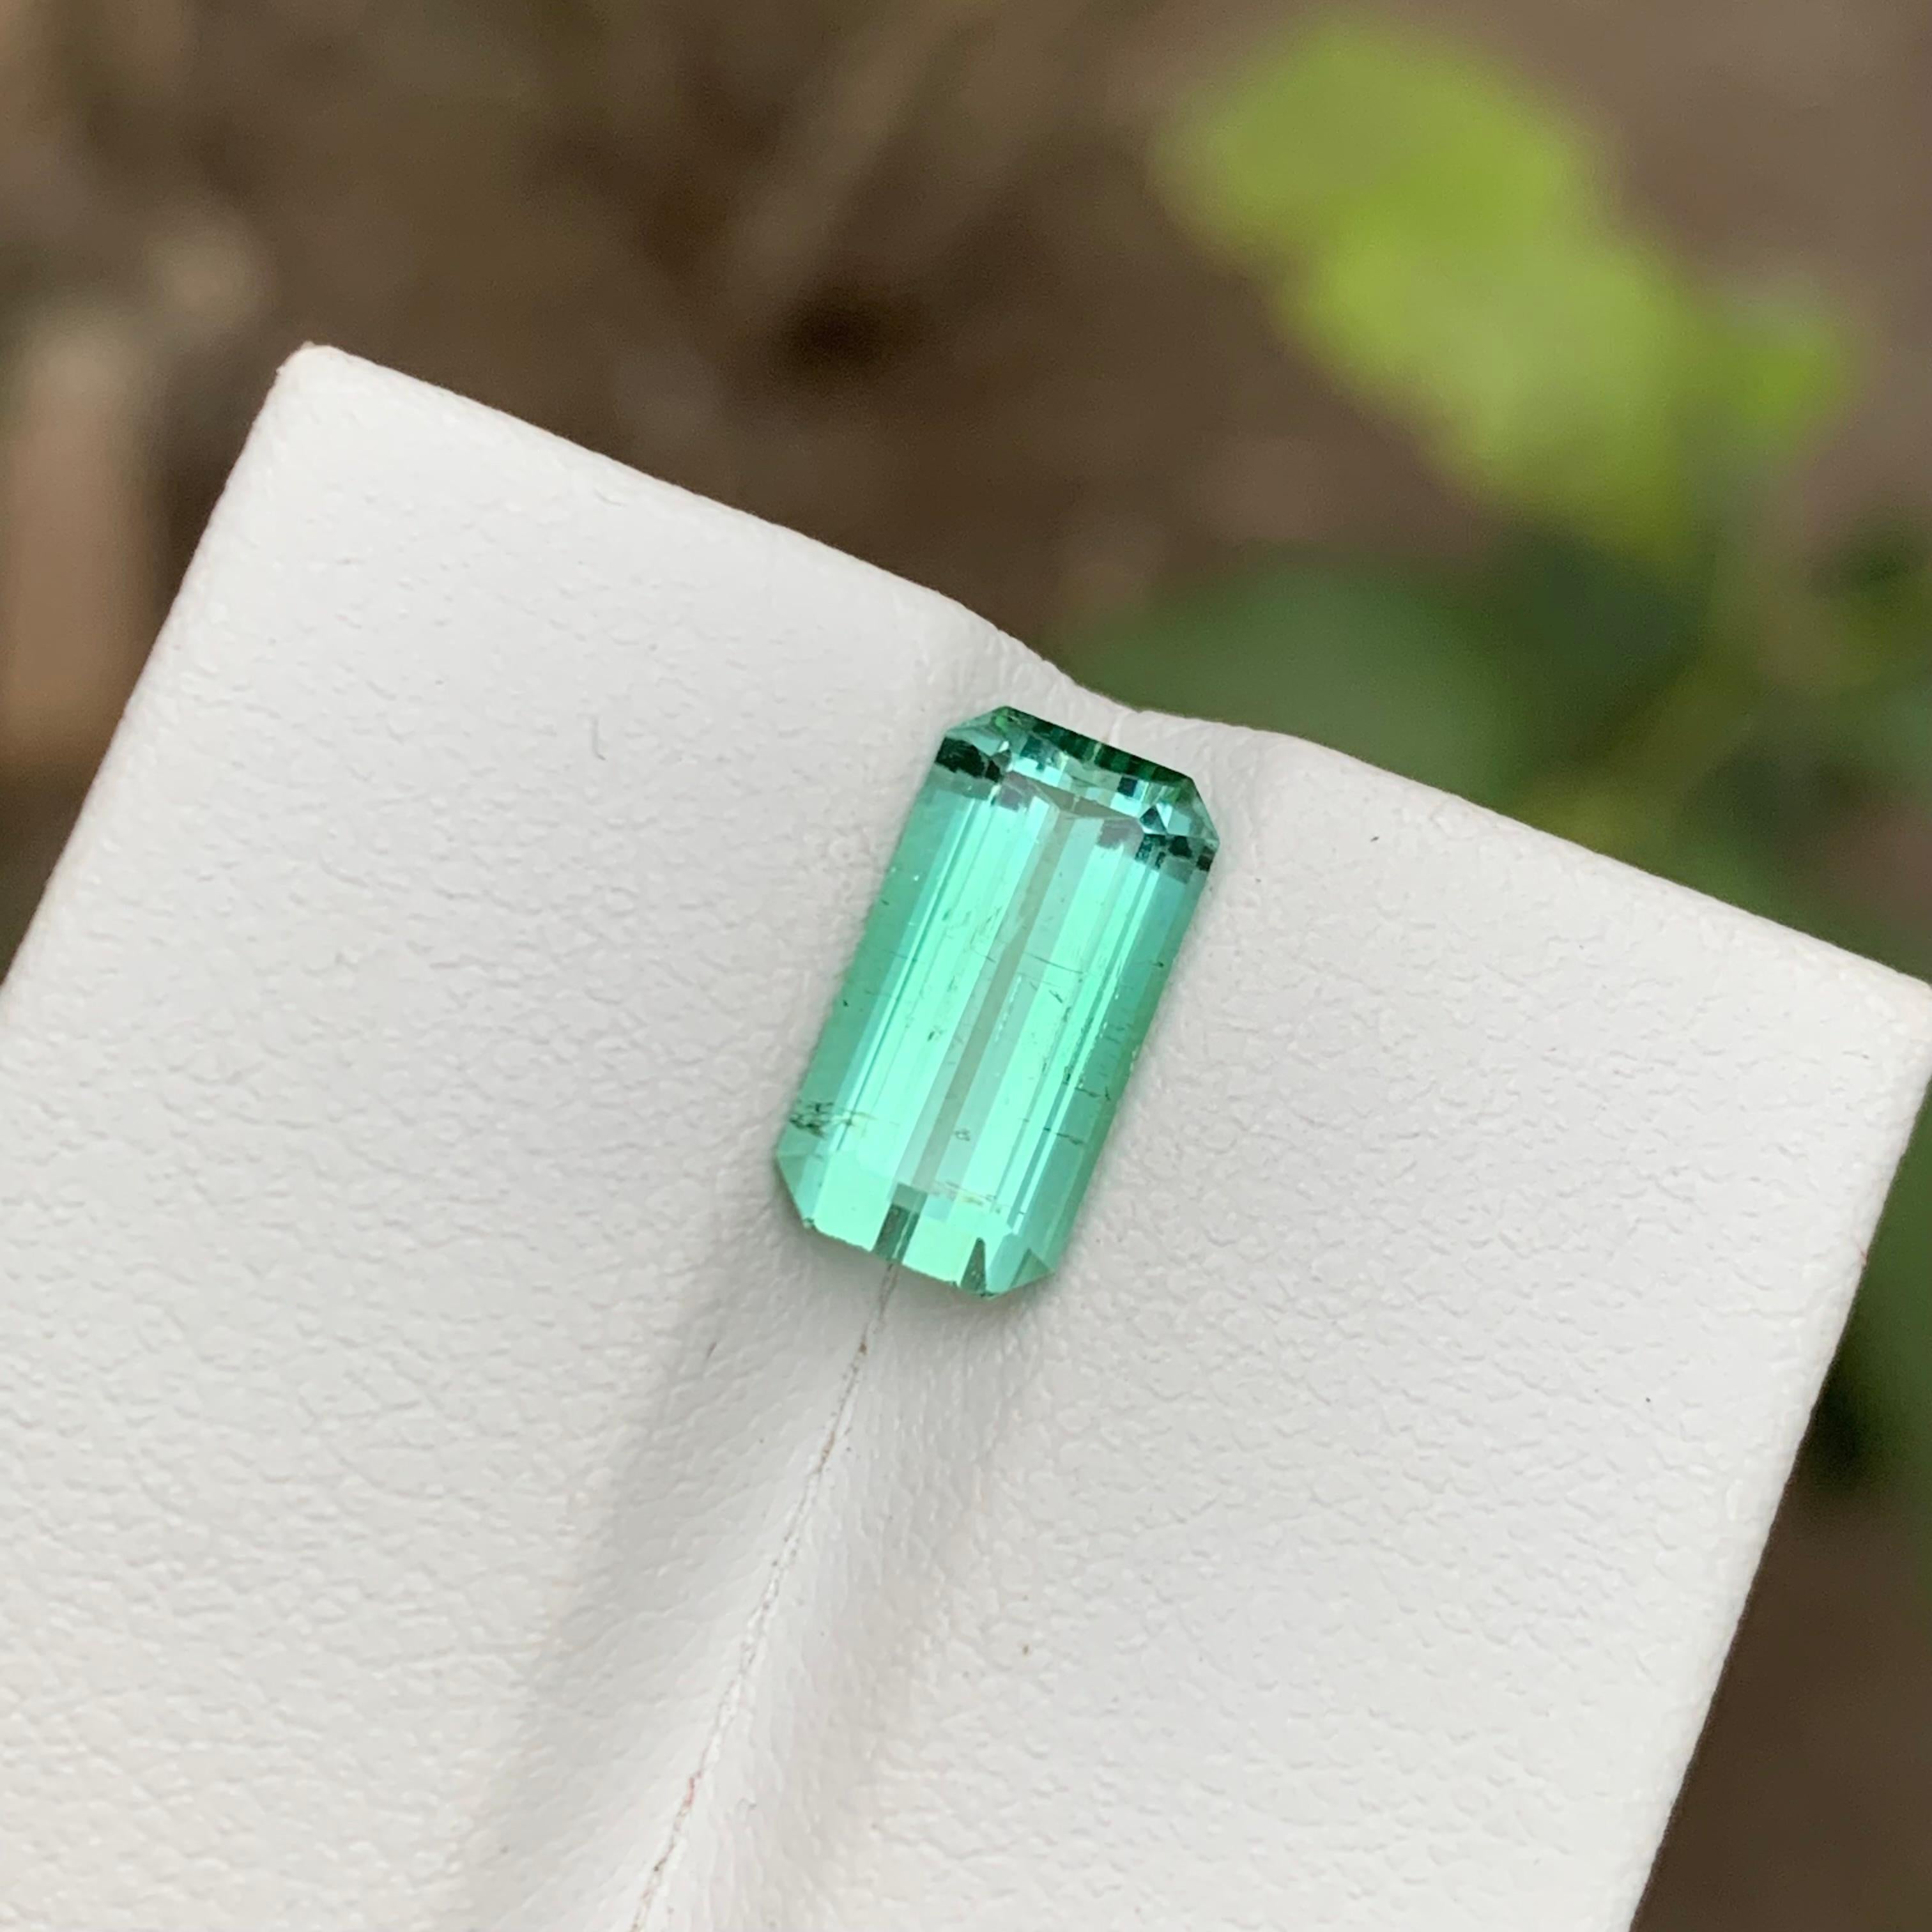 Contemporary Rare Light Bluish Green Tourmaline Gemstone 2.70 Ct Emerald Cut for Ring Jewelry For Sale